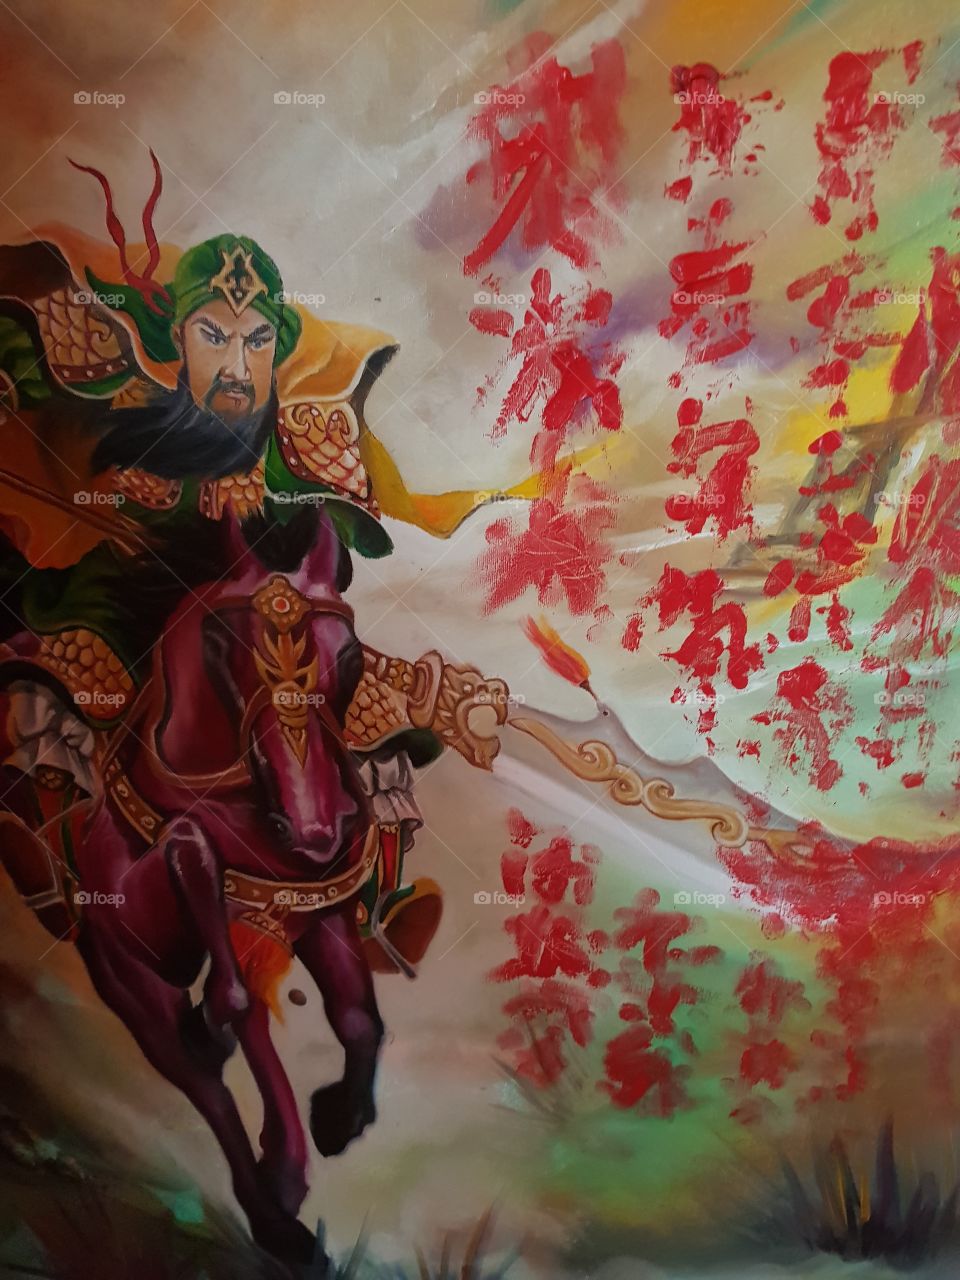 this is my painting, the god of war general, whose name is Dewa Guan Gong